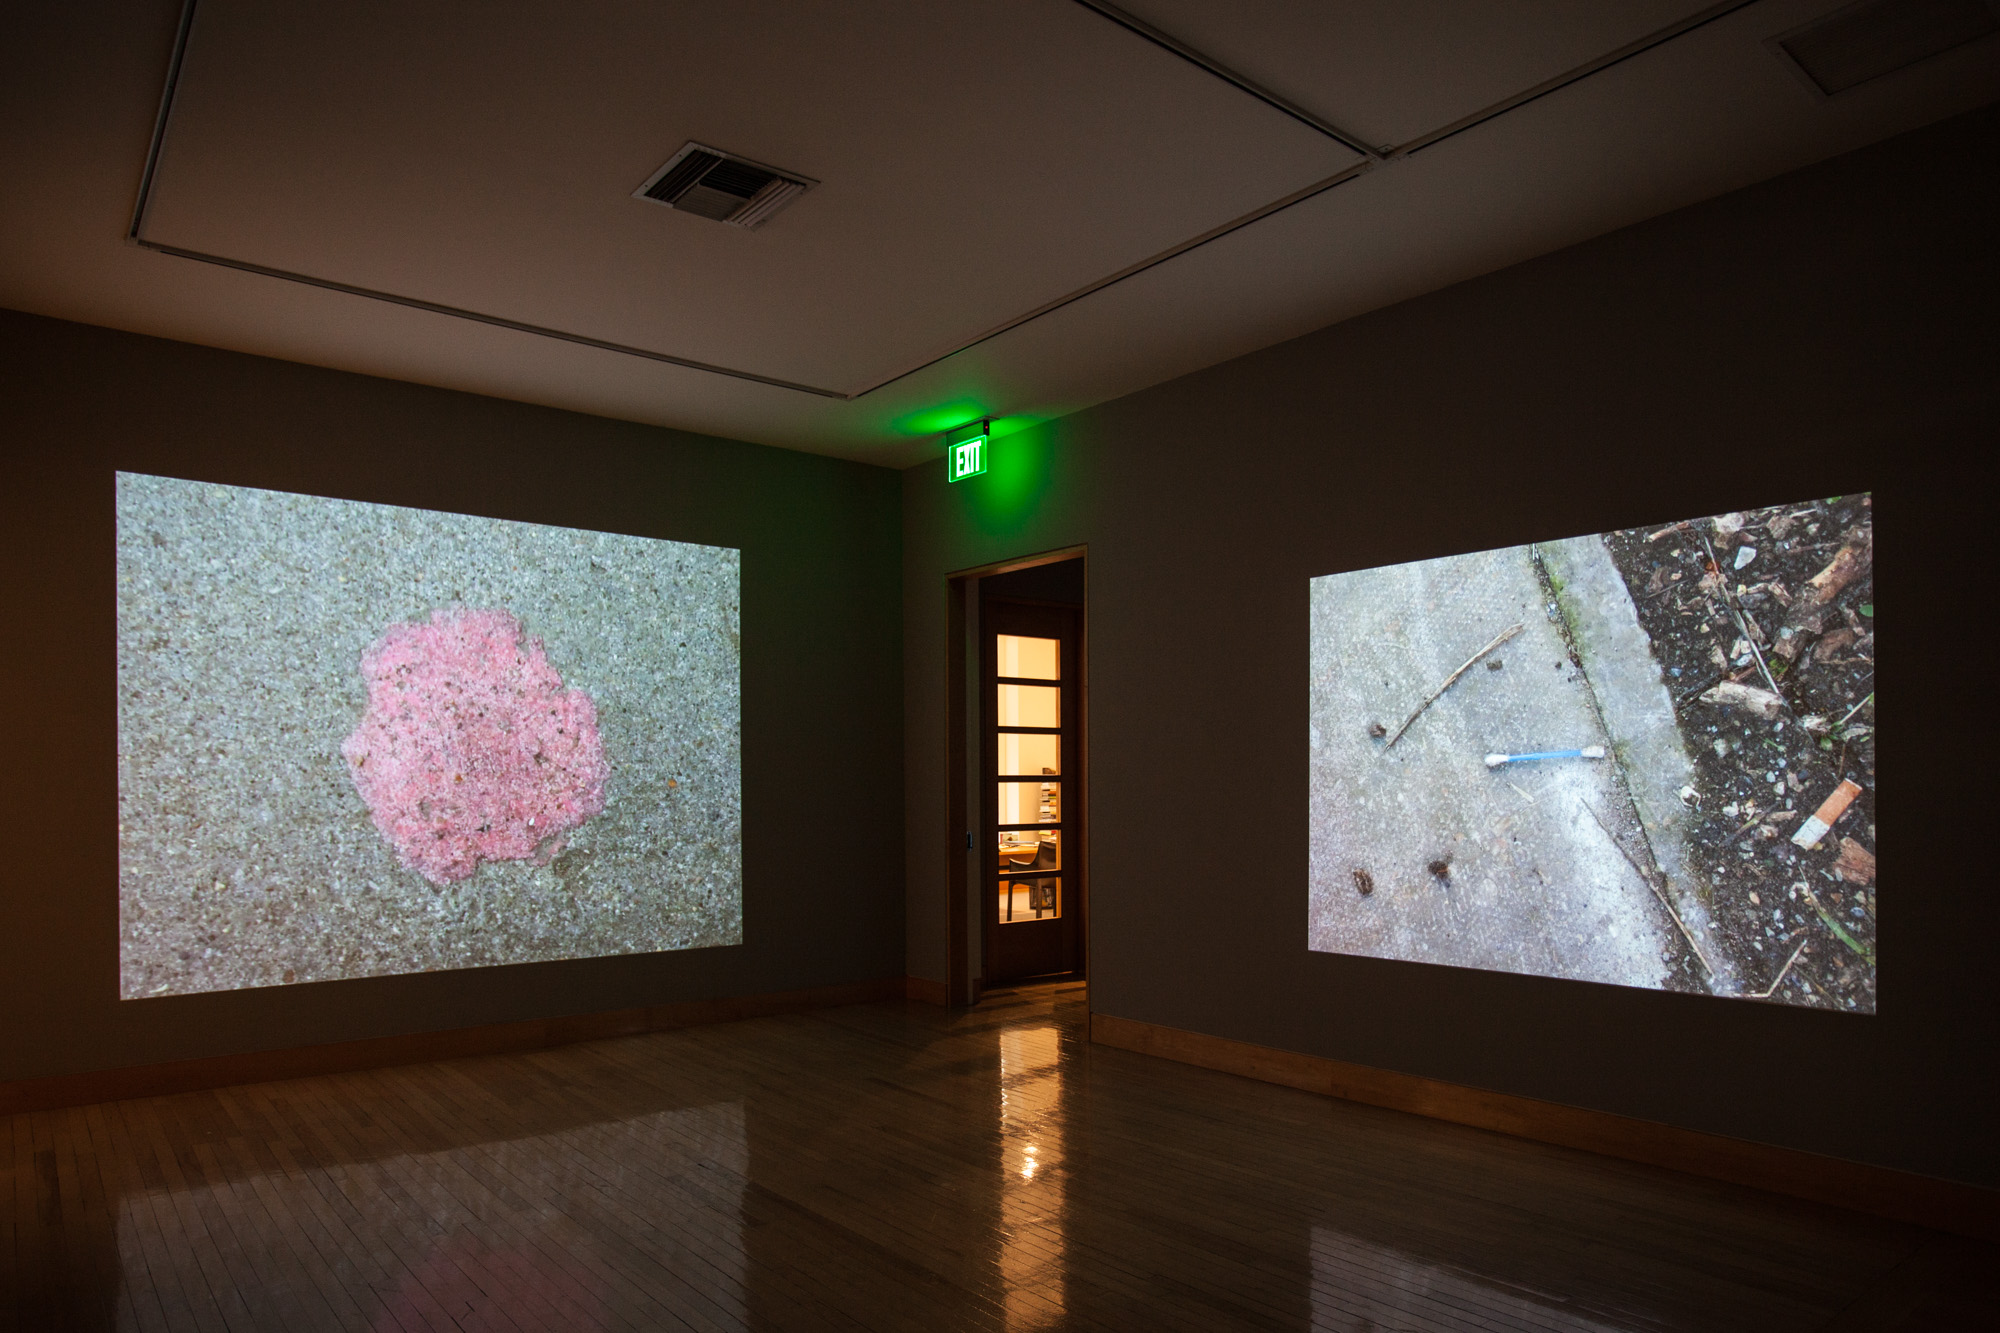 An installation shot of two projections in the darkened gallery